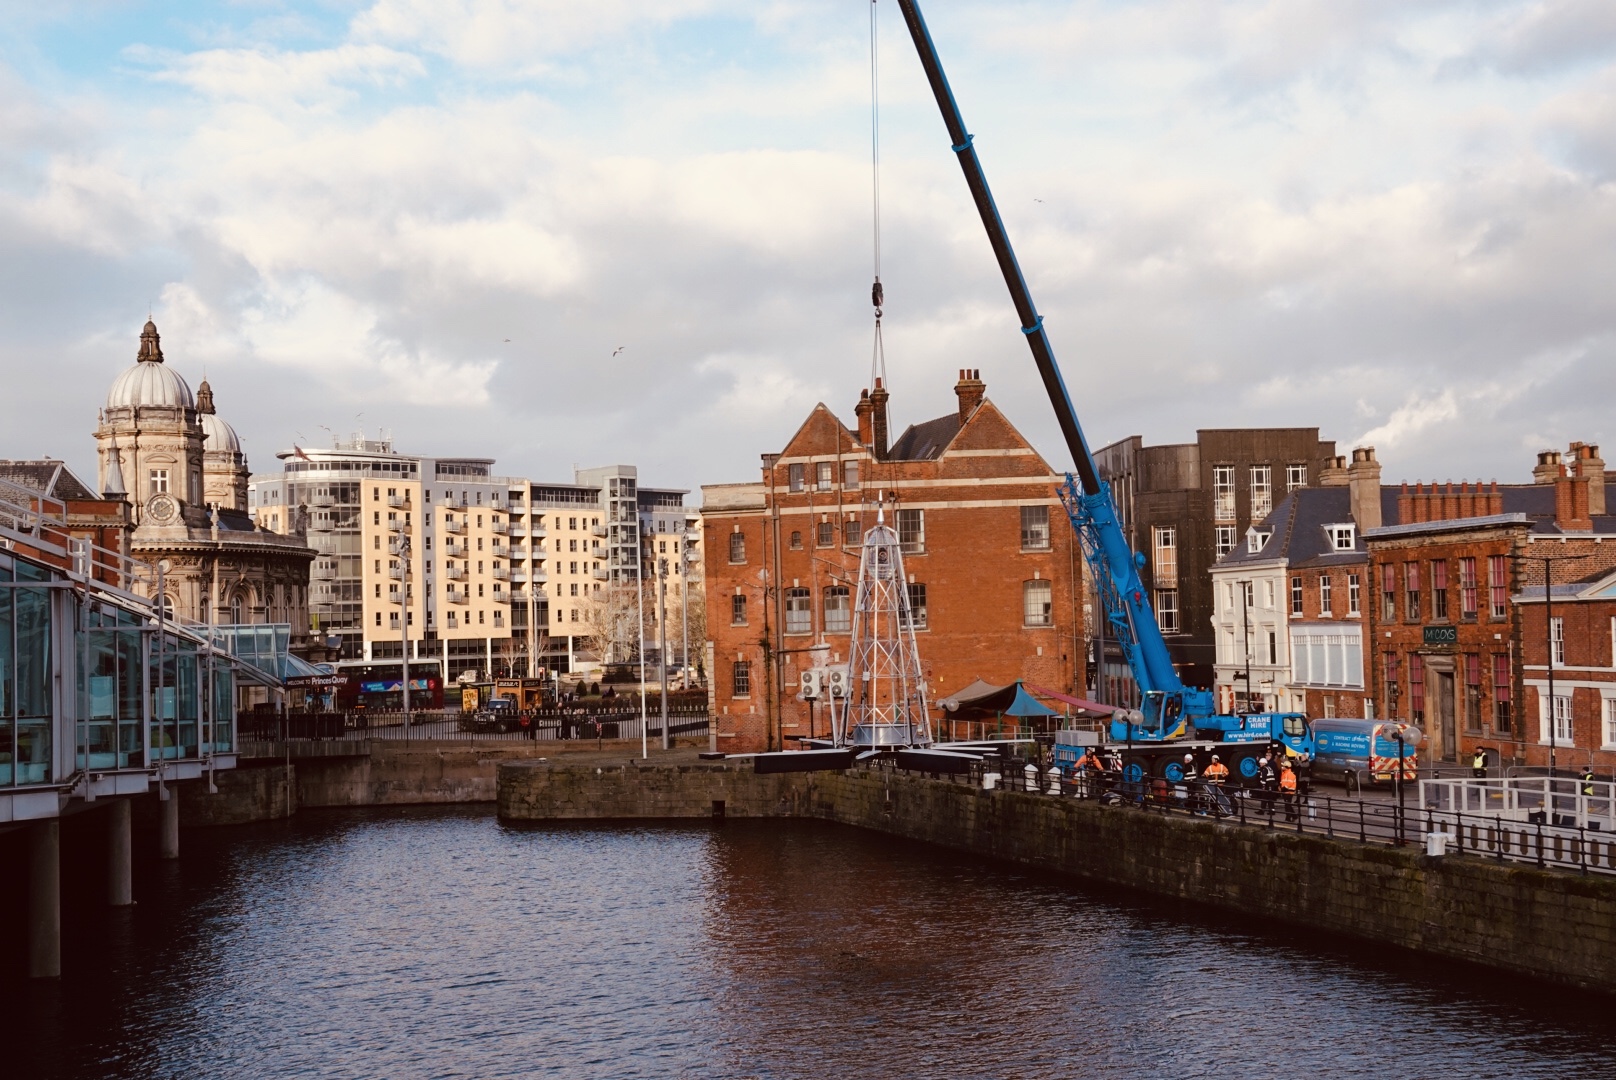 Oracle, Navigate, being lifted into Prince's Dock